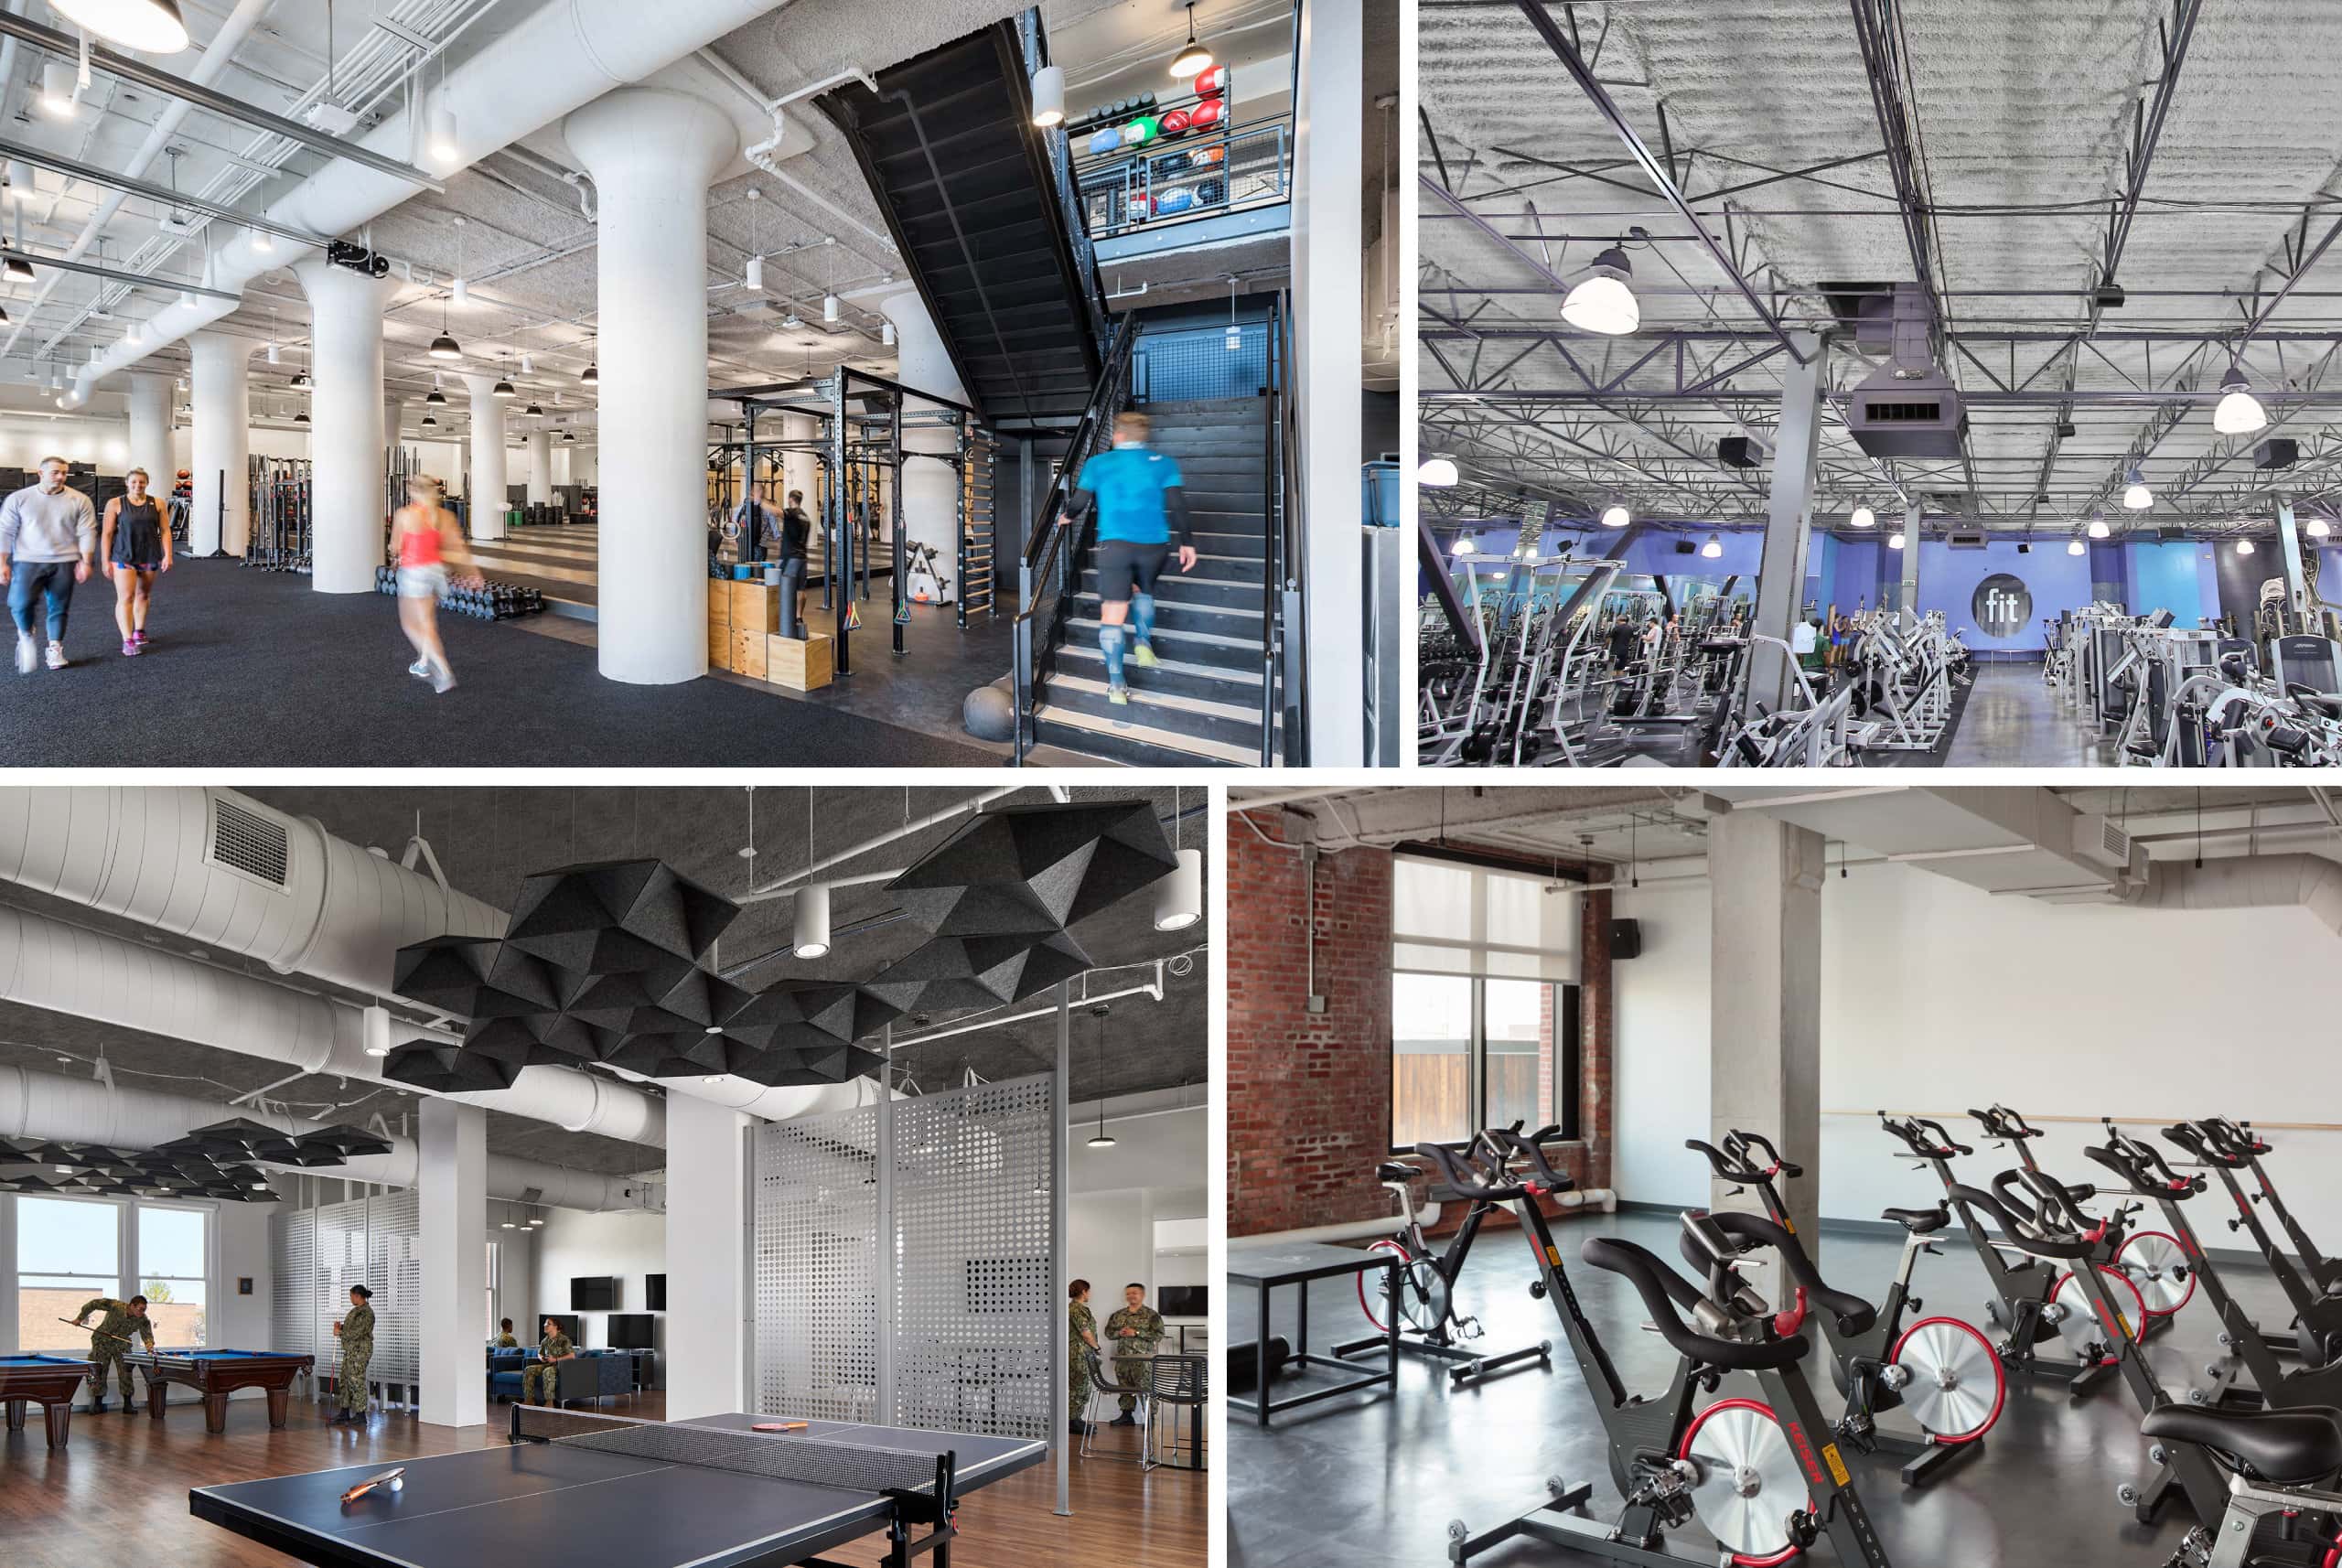 Recreation rooms and fitness studio projects